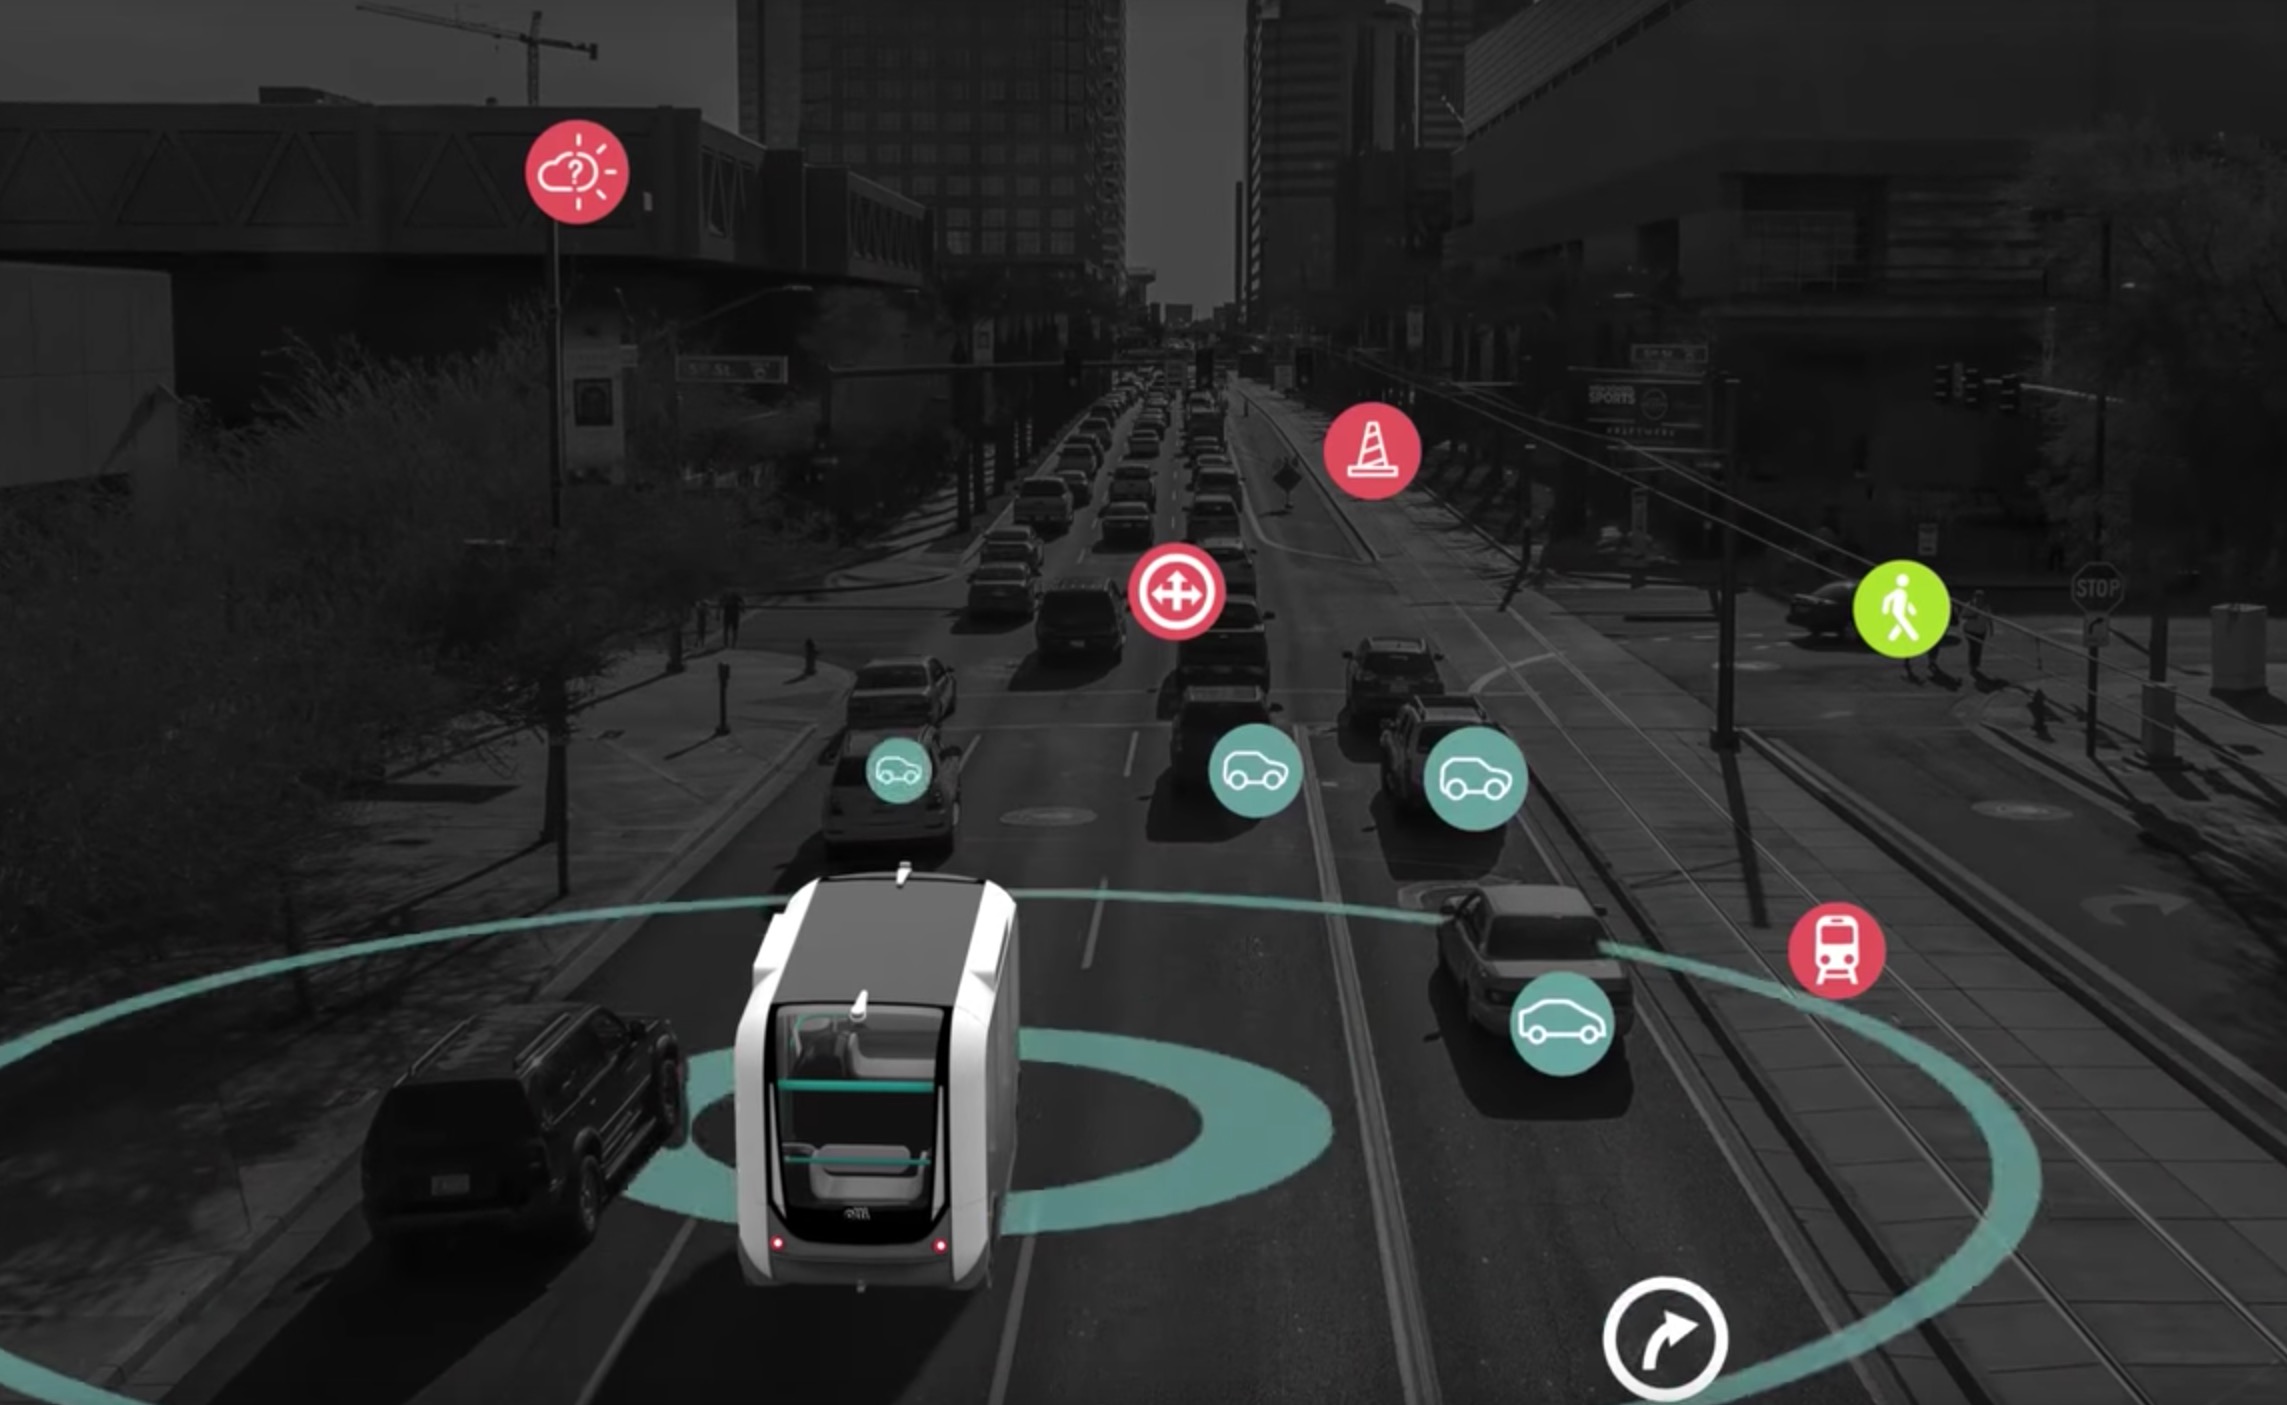  Olli's concept for self-driving sensors 